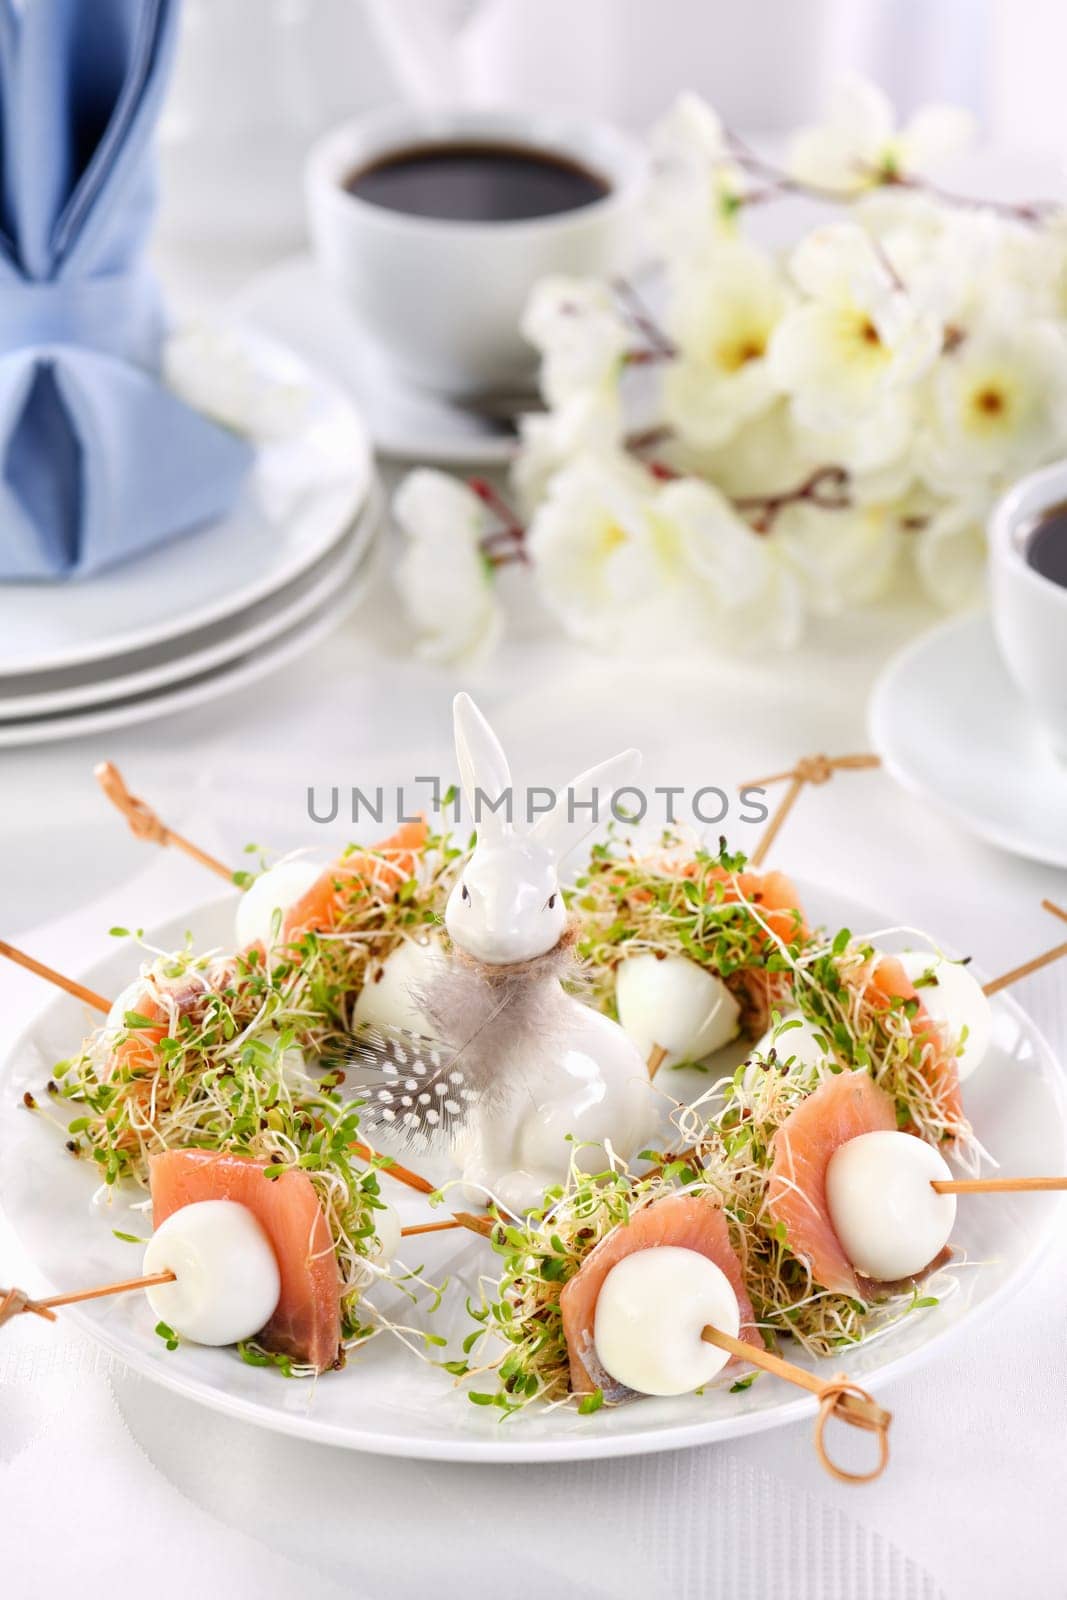 Easter table appetizer by Apolonia